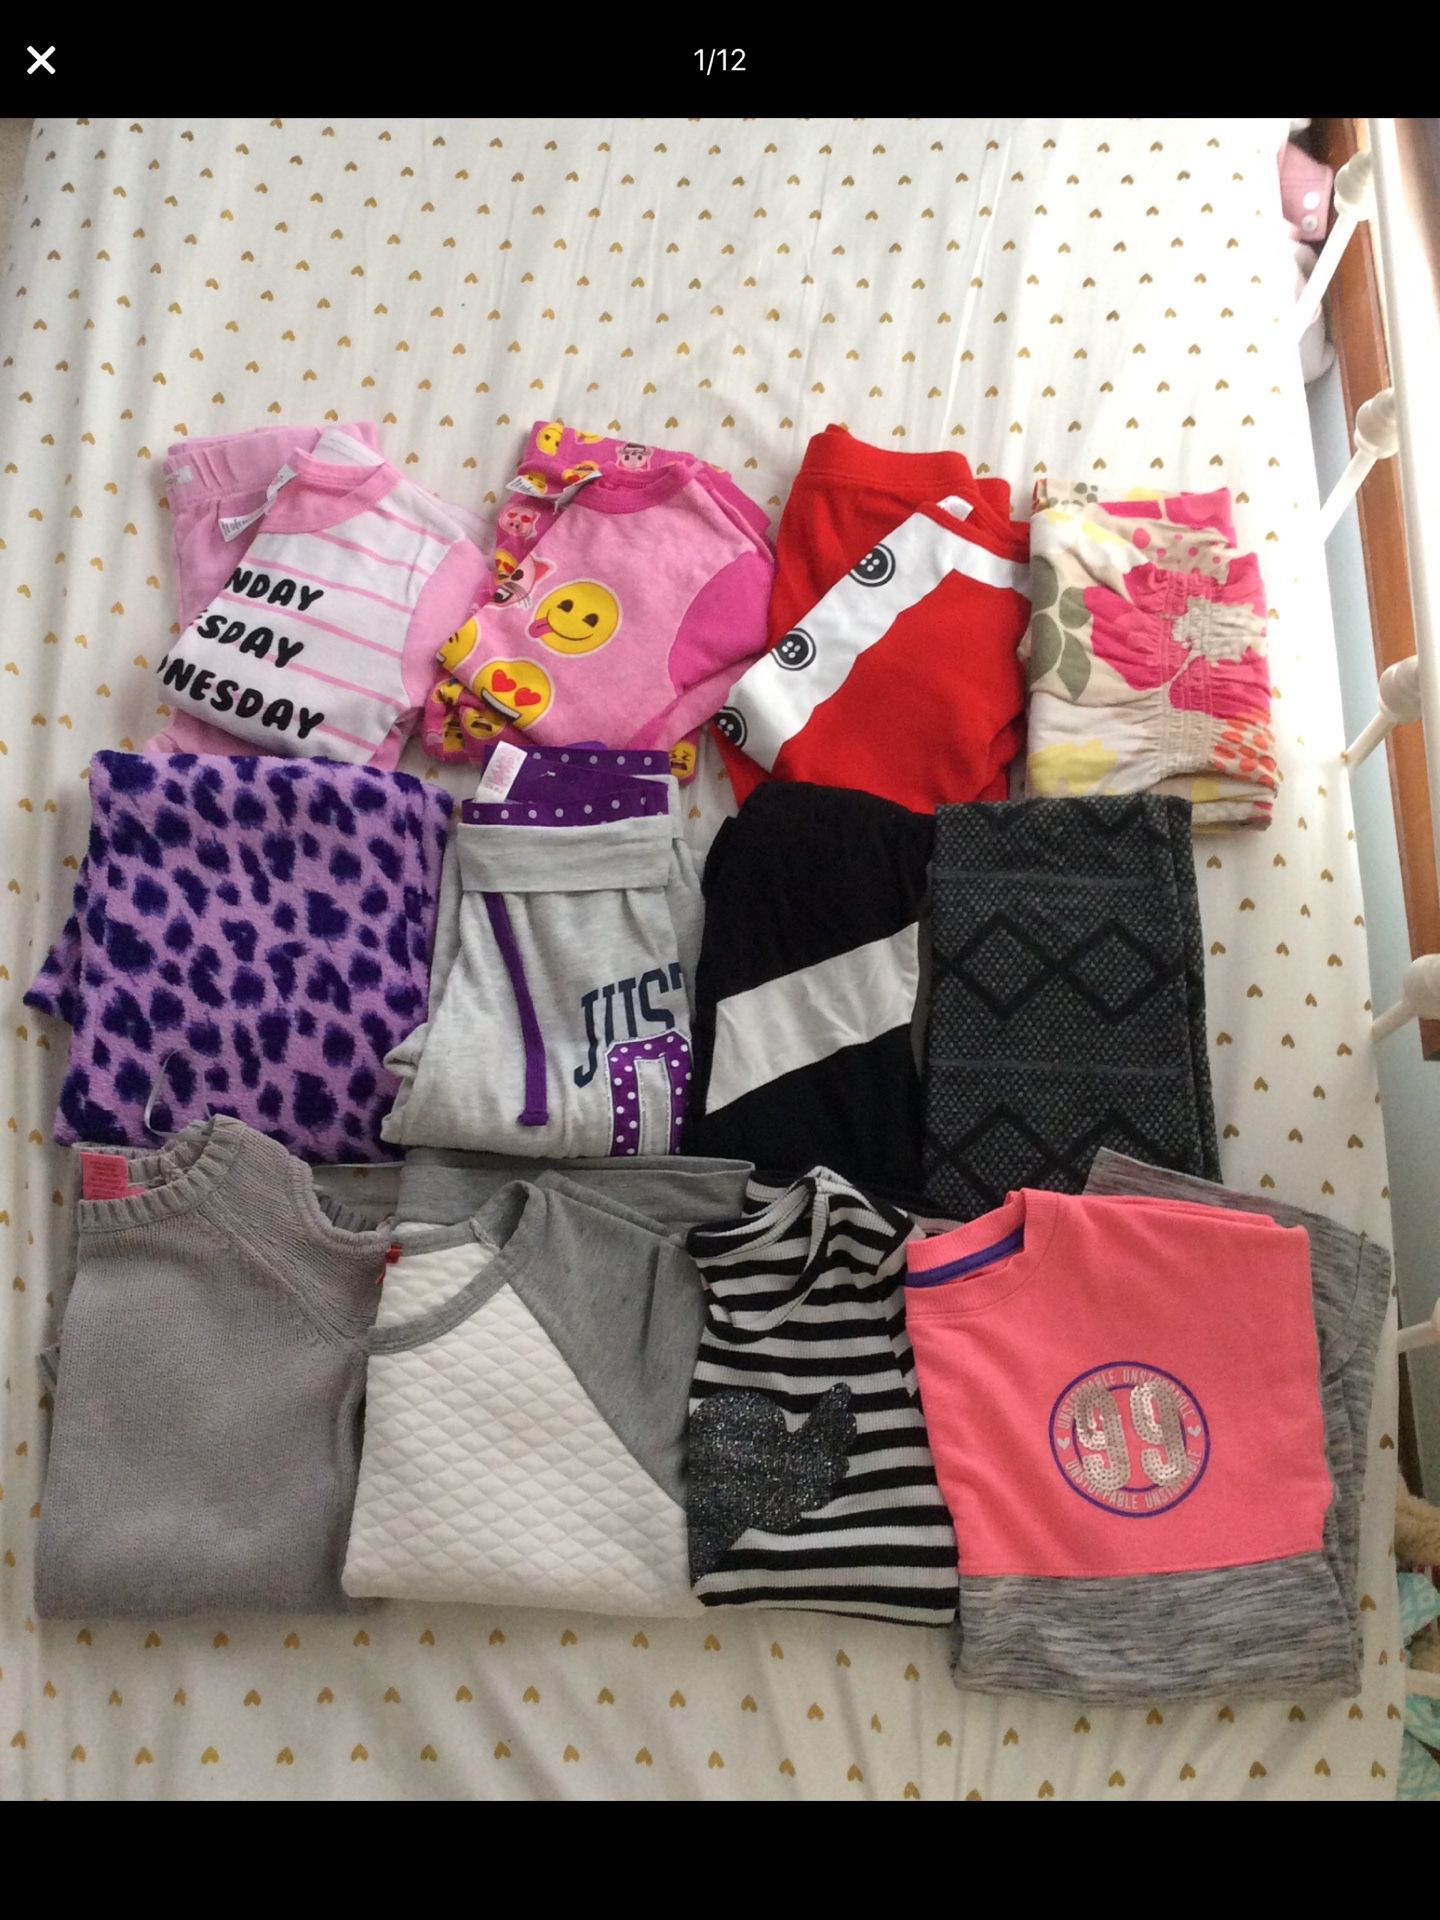 Size 7-8 and 10-12 girls clothing